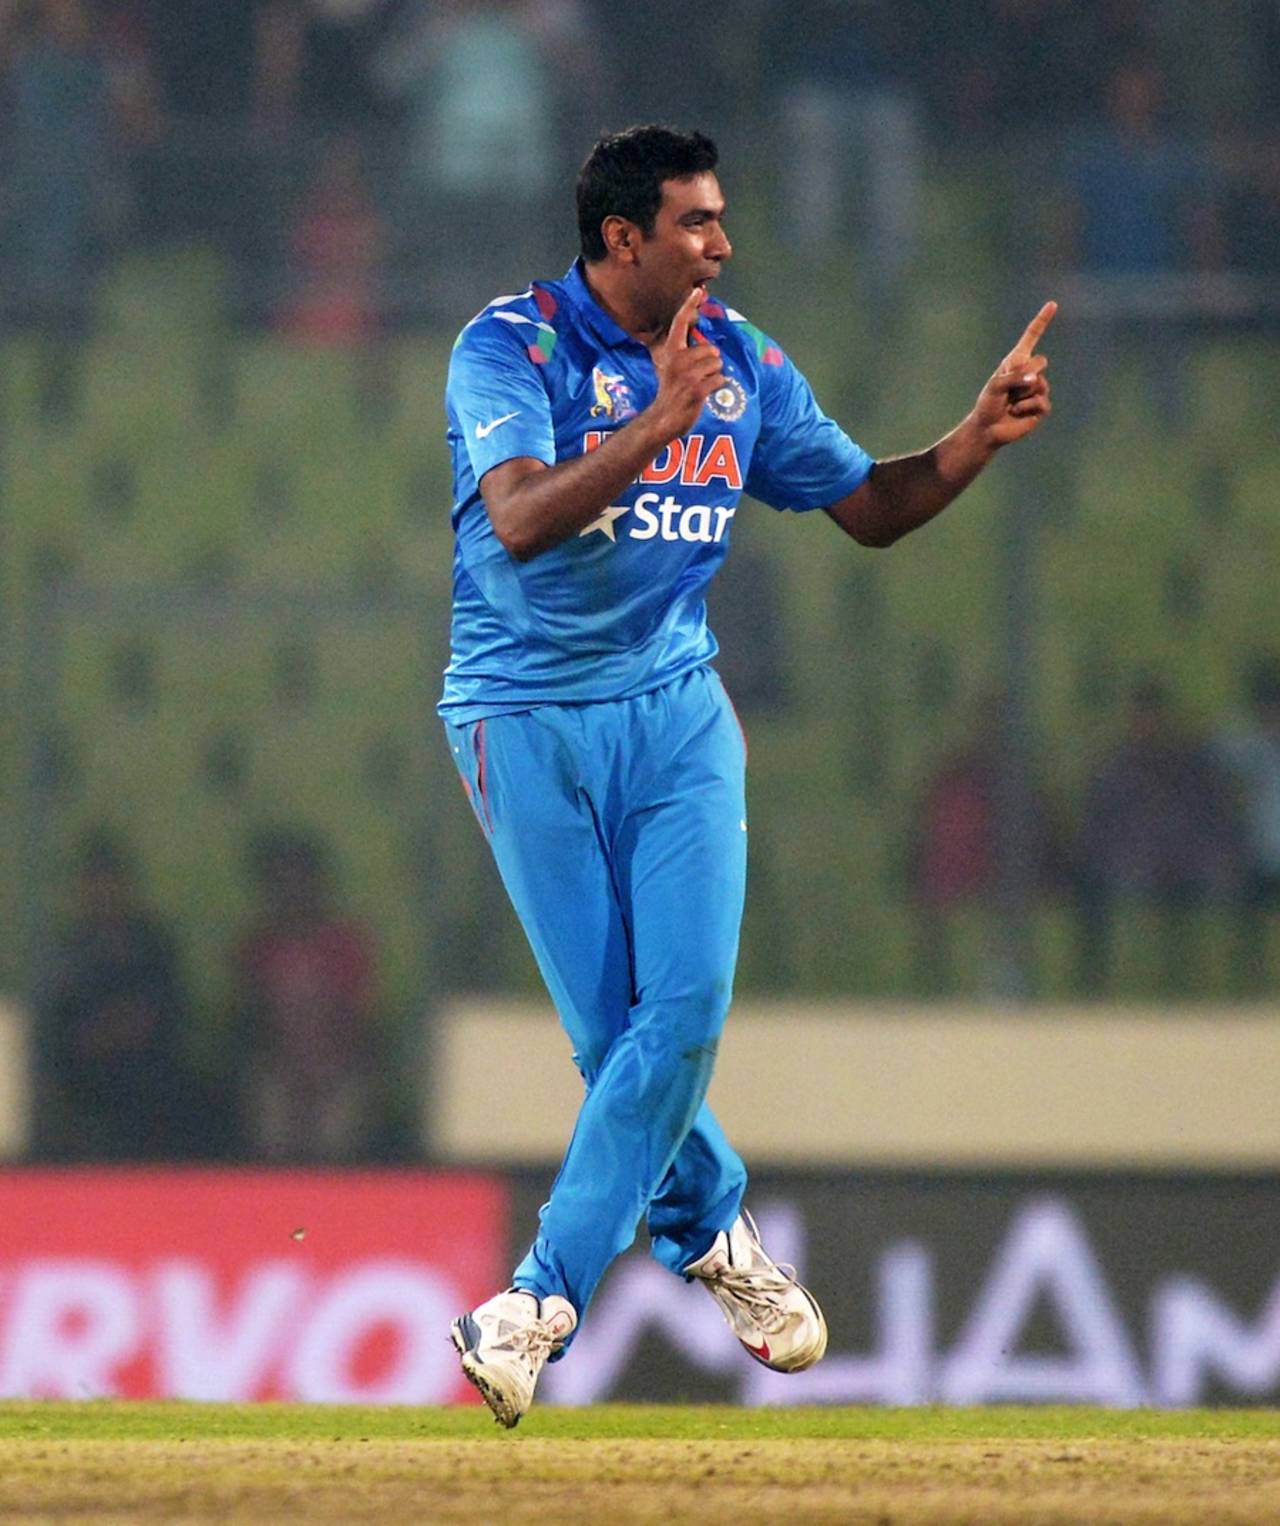 R Ashwin's bowling more carrom balls is an indicator that he is looking to take wickets&nbsp;&nbsp;&bull;&nbsp;&nbsp;AFP